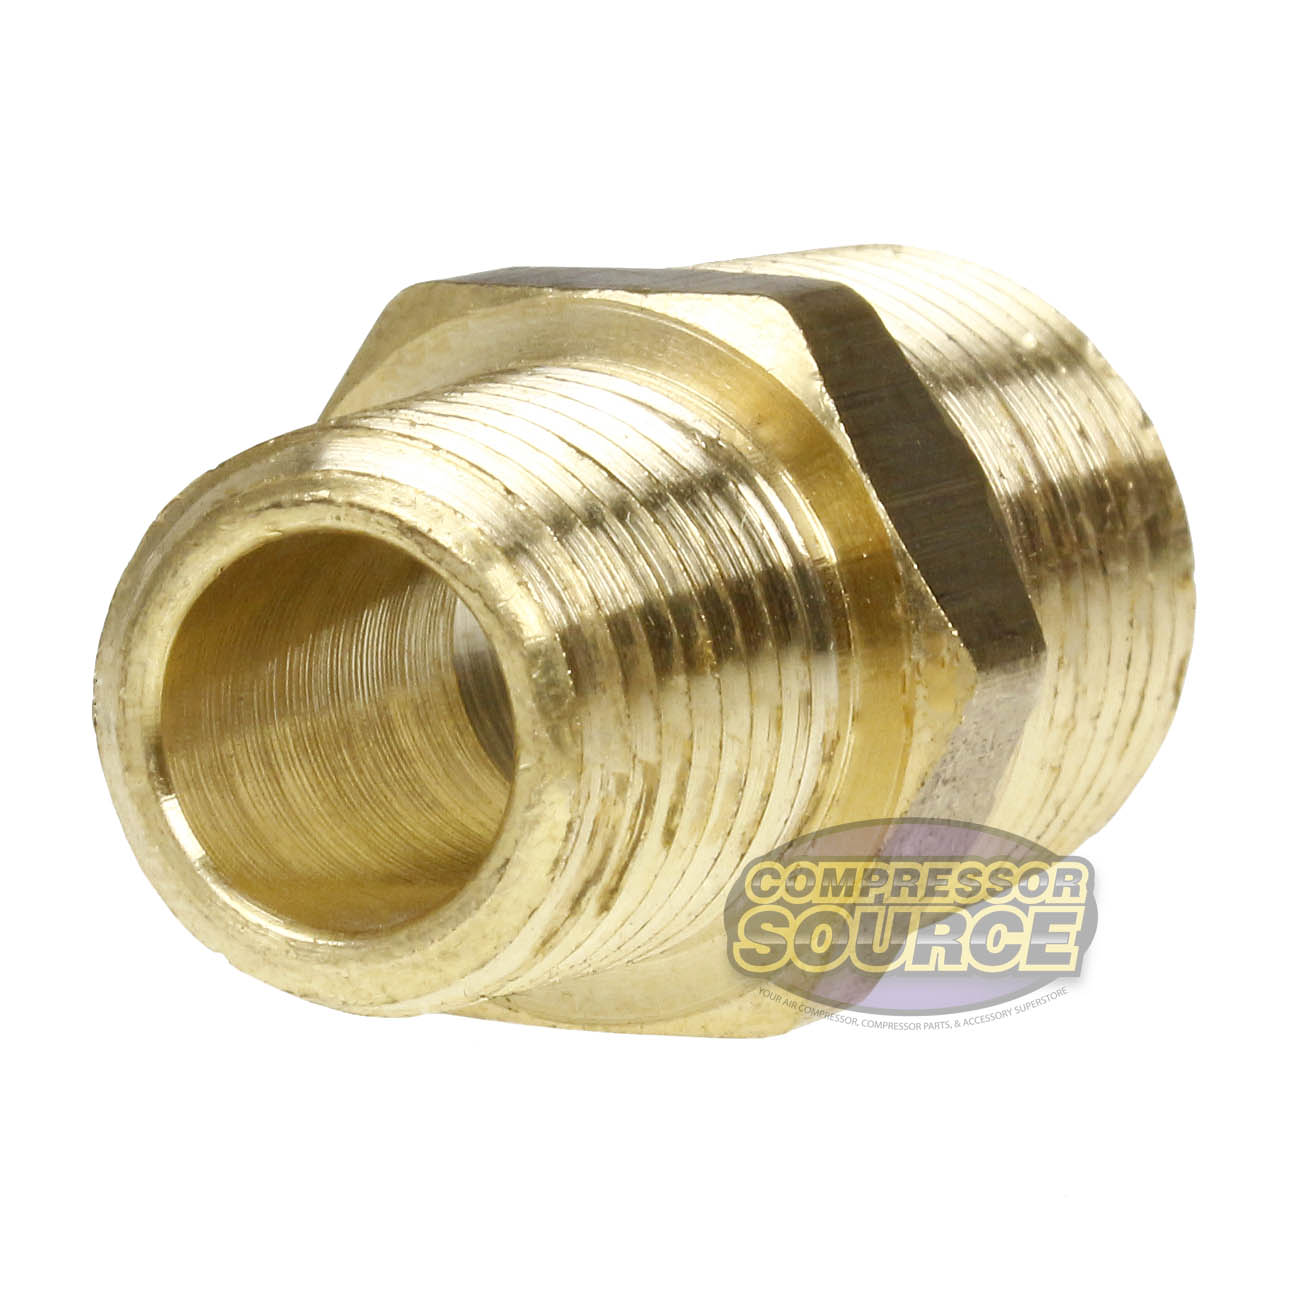 5 Pack 3/8" x 1/4" Male NPTF Pipe Reducing Hex Nipple Solid Brass Pipe Fitting